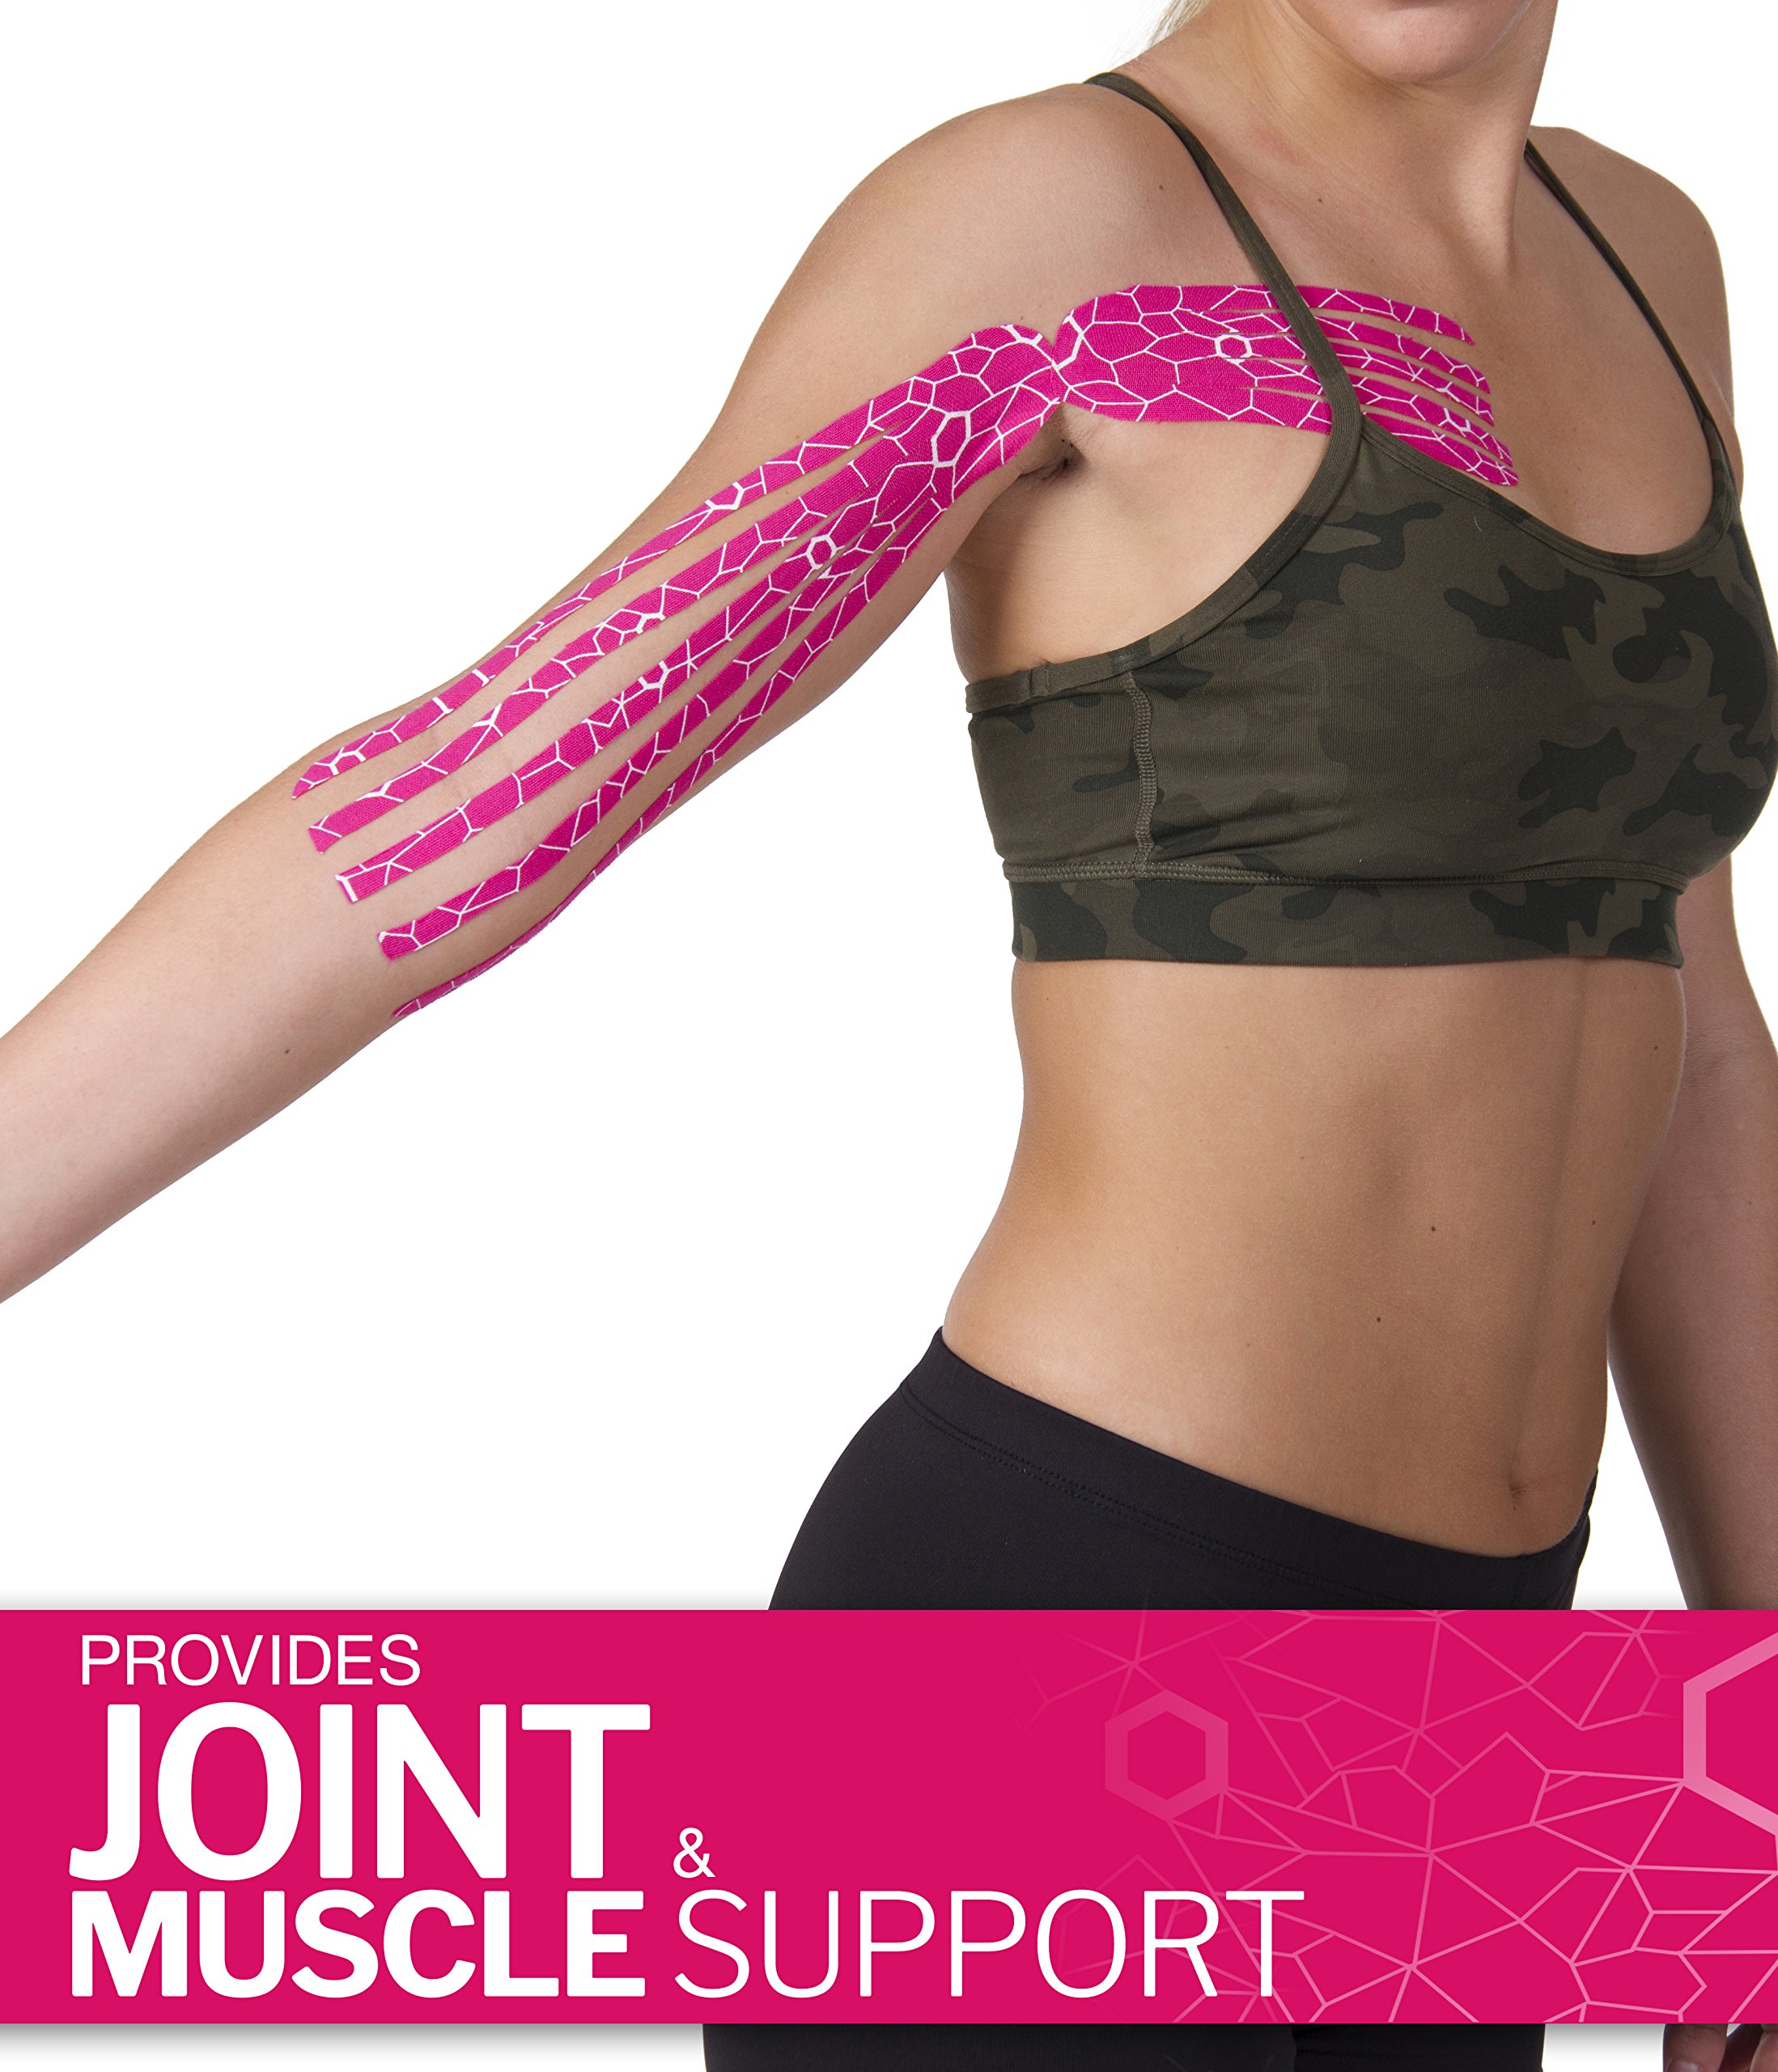 THERABAND Kinesiology Tape with XactStretch Indicator for Perfect Stretch and Application Every Time, Best in Class Adhesion, Water Resistant